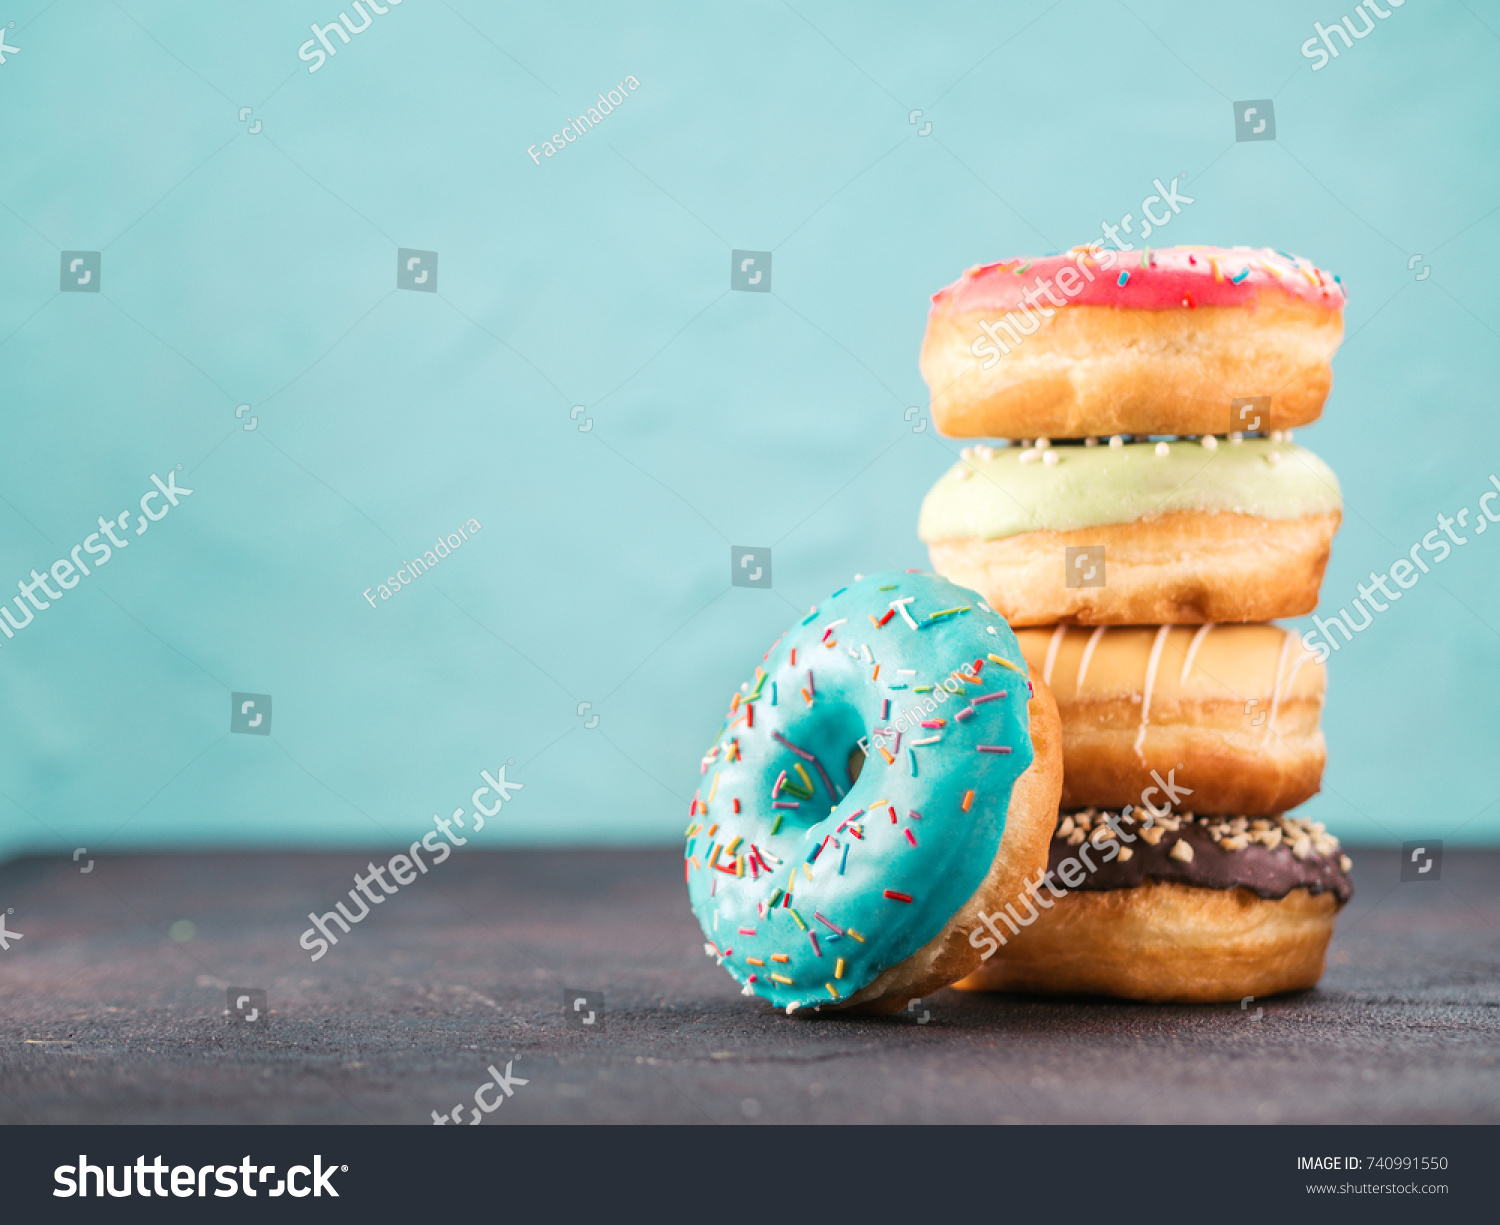 Stack of assorted donuts on black and blue cement background. Blue glazed doughnut with sprinkles on foreground. Copy space. Shallow DOF #740991550